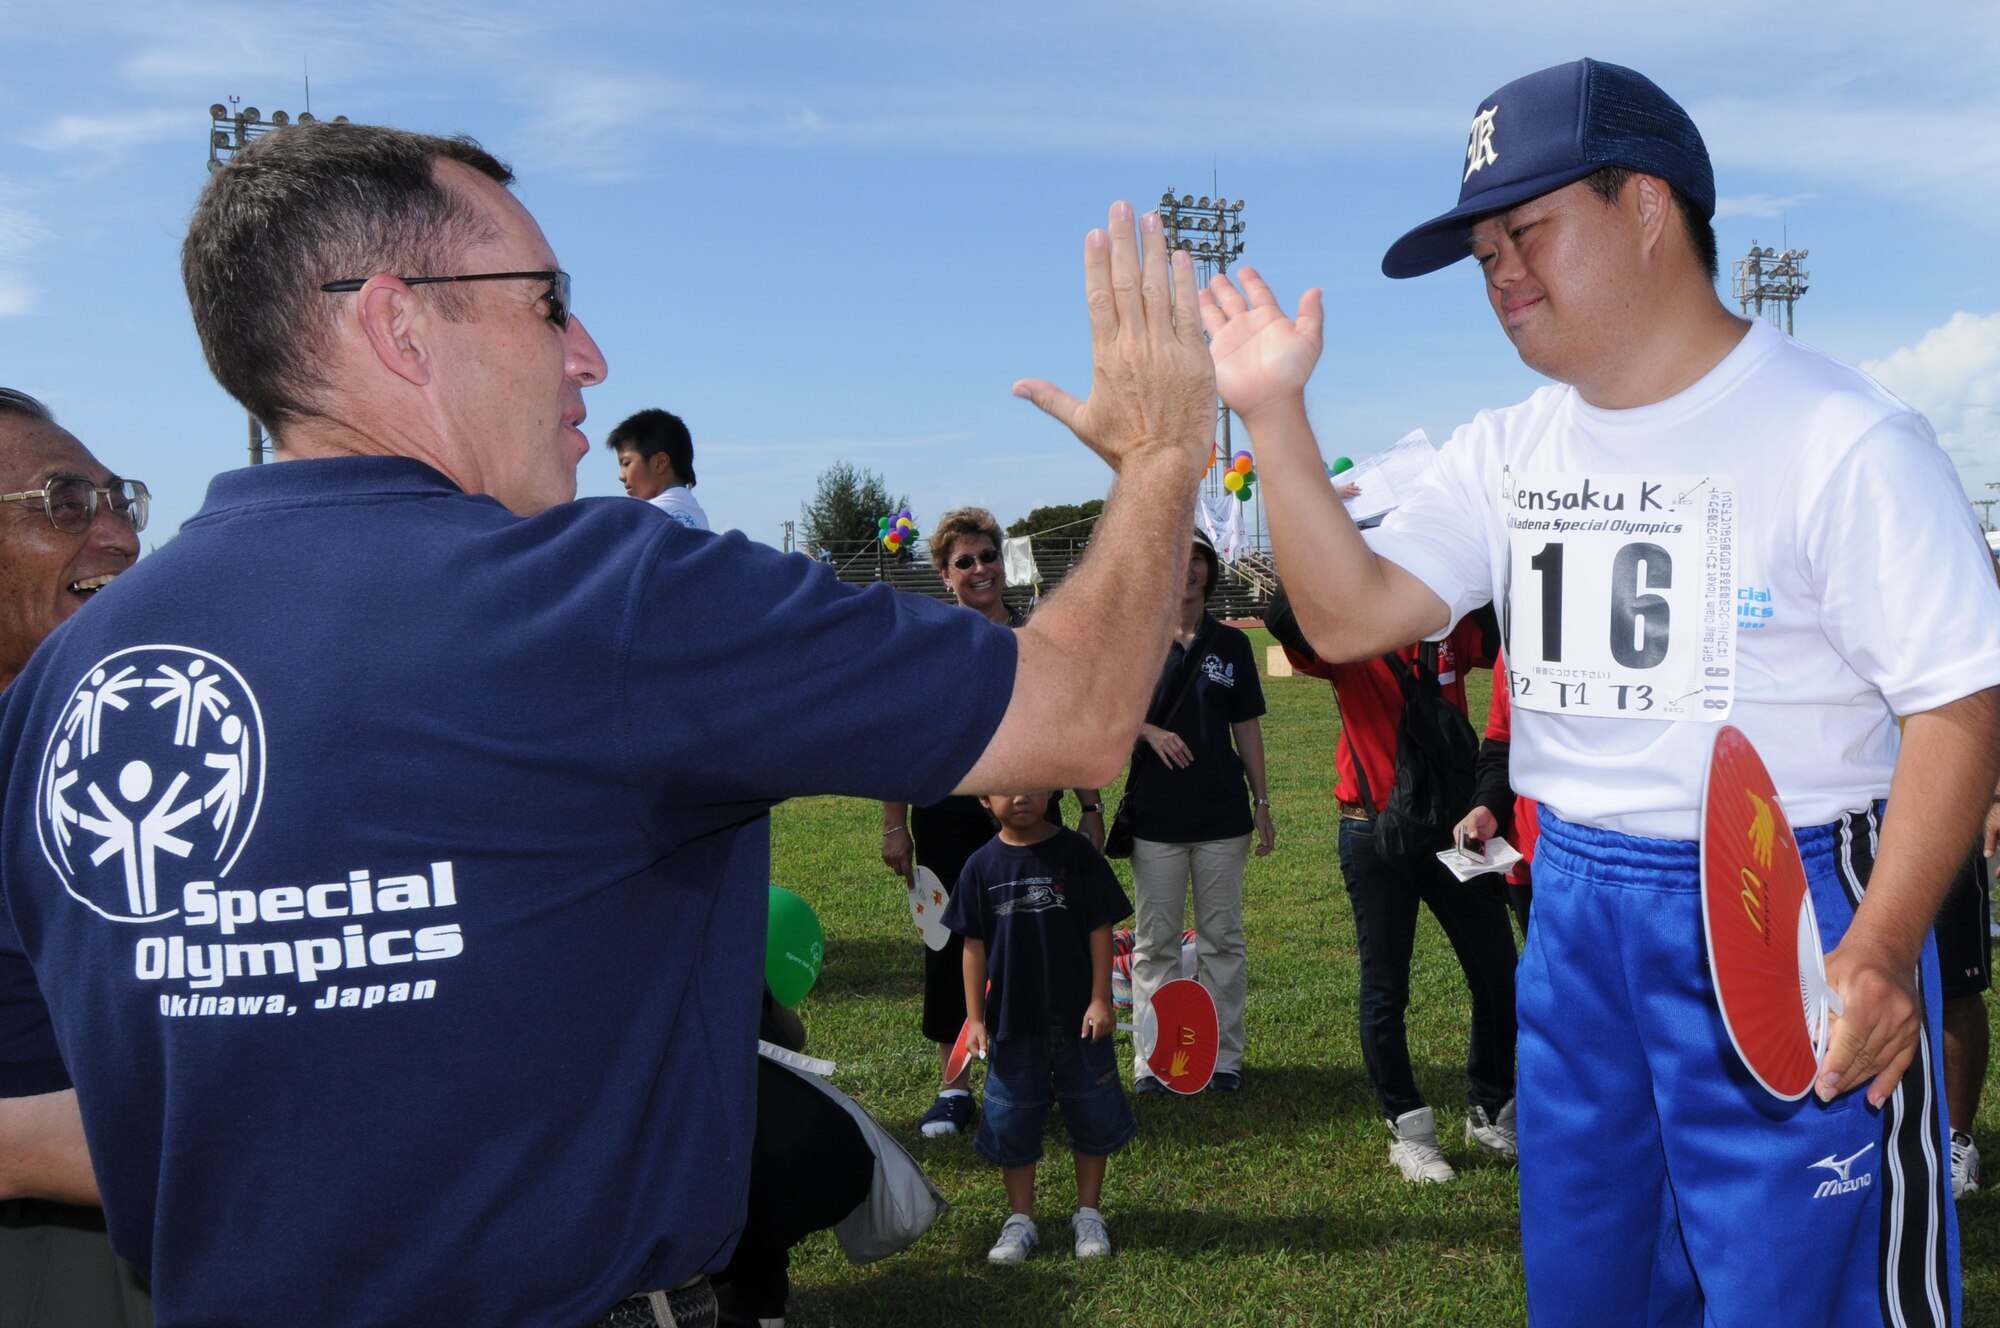 Brig. Gen. Brett  Williams, 18th Wing commander, high-fives Kensaku-san before awarding him a gold medal for running the 30 meter dash at the Kadena Special Olympics Nov. 8, 2008, Kadena Air Base, Japan. Kadena hosted the 9th Annual Special Olympic Games and Art Festival for special needs Okinawan and American adult and child athletes.   (U.S. Air Force photo/Airman 1st Class Amanda Grabiec)                           